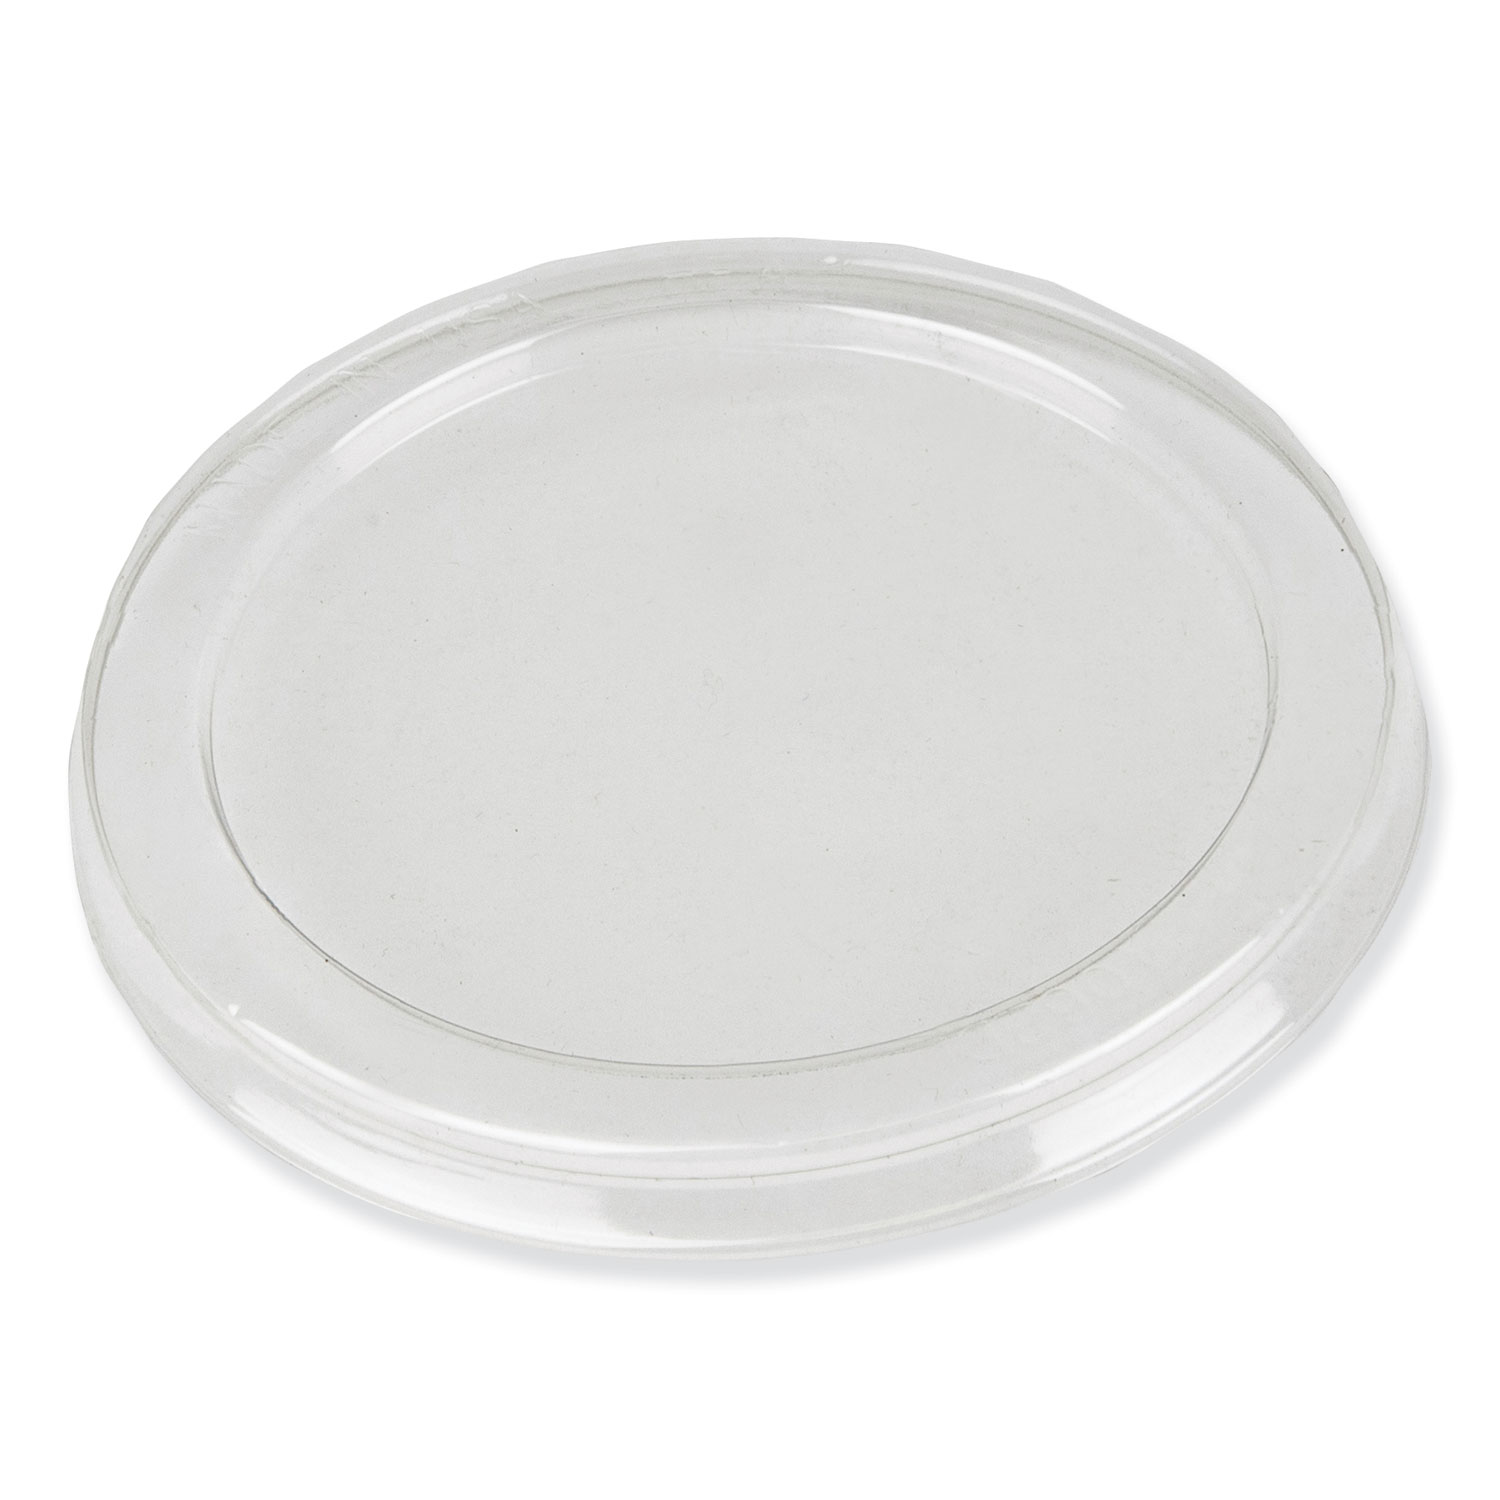  Durable Packaging P14001000 Dome Lids for 3 1/4 Round Containers, 1000/Carton (DPKP14001000) 